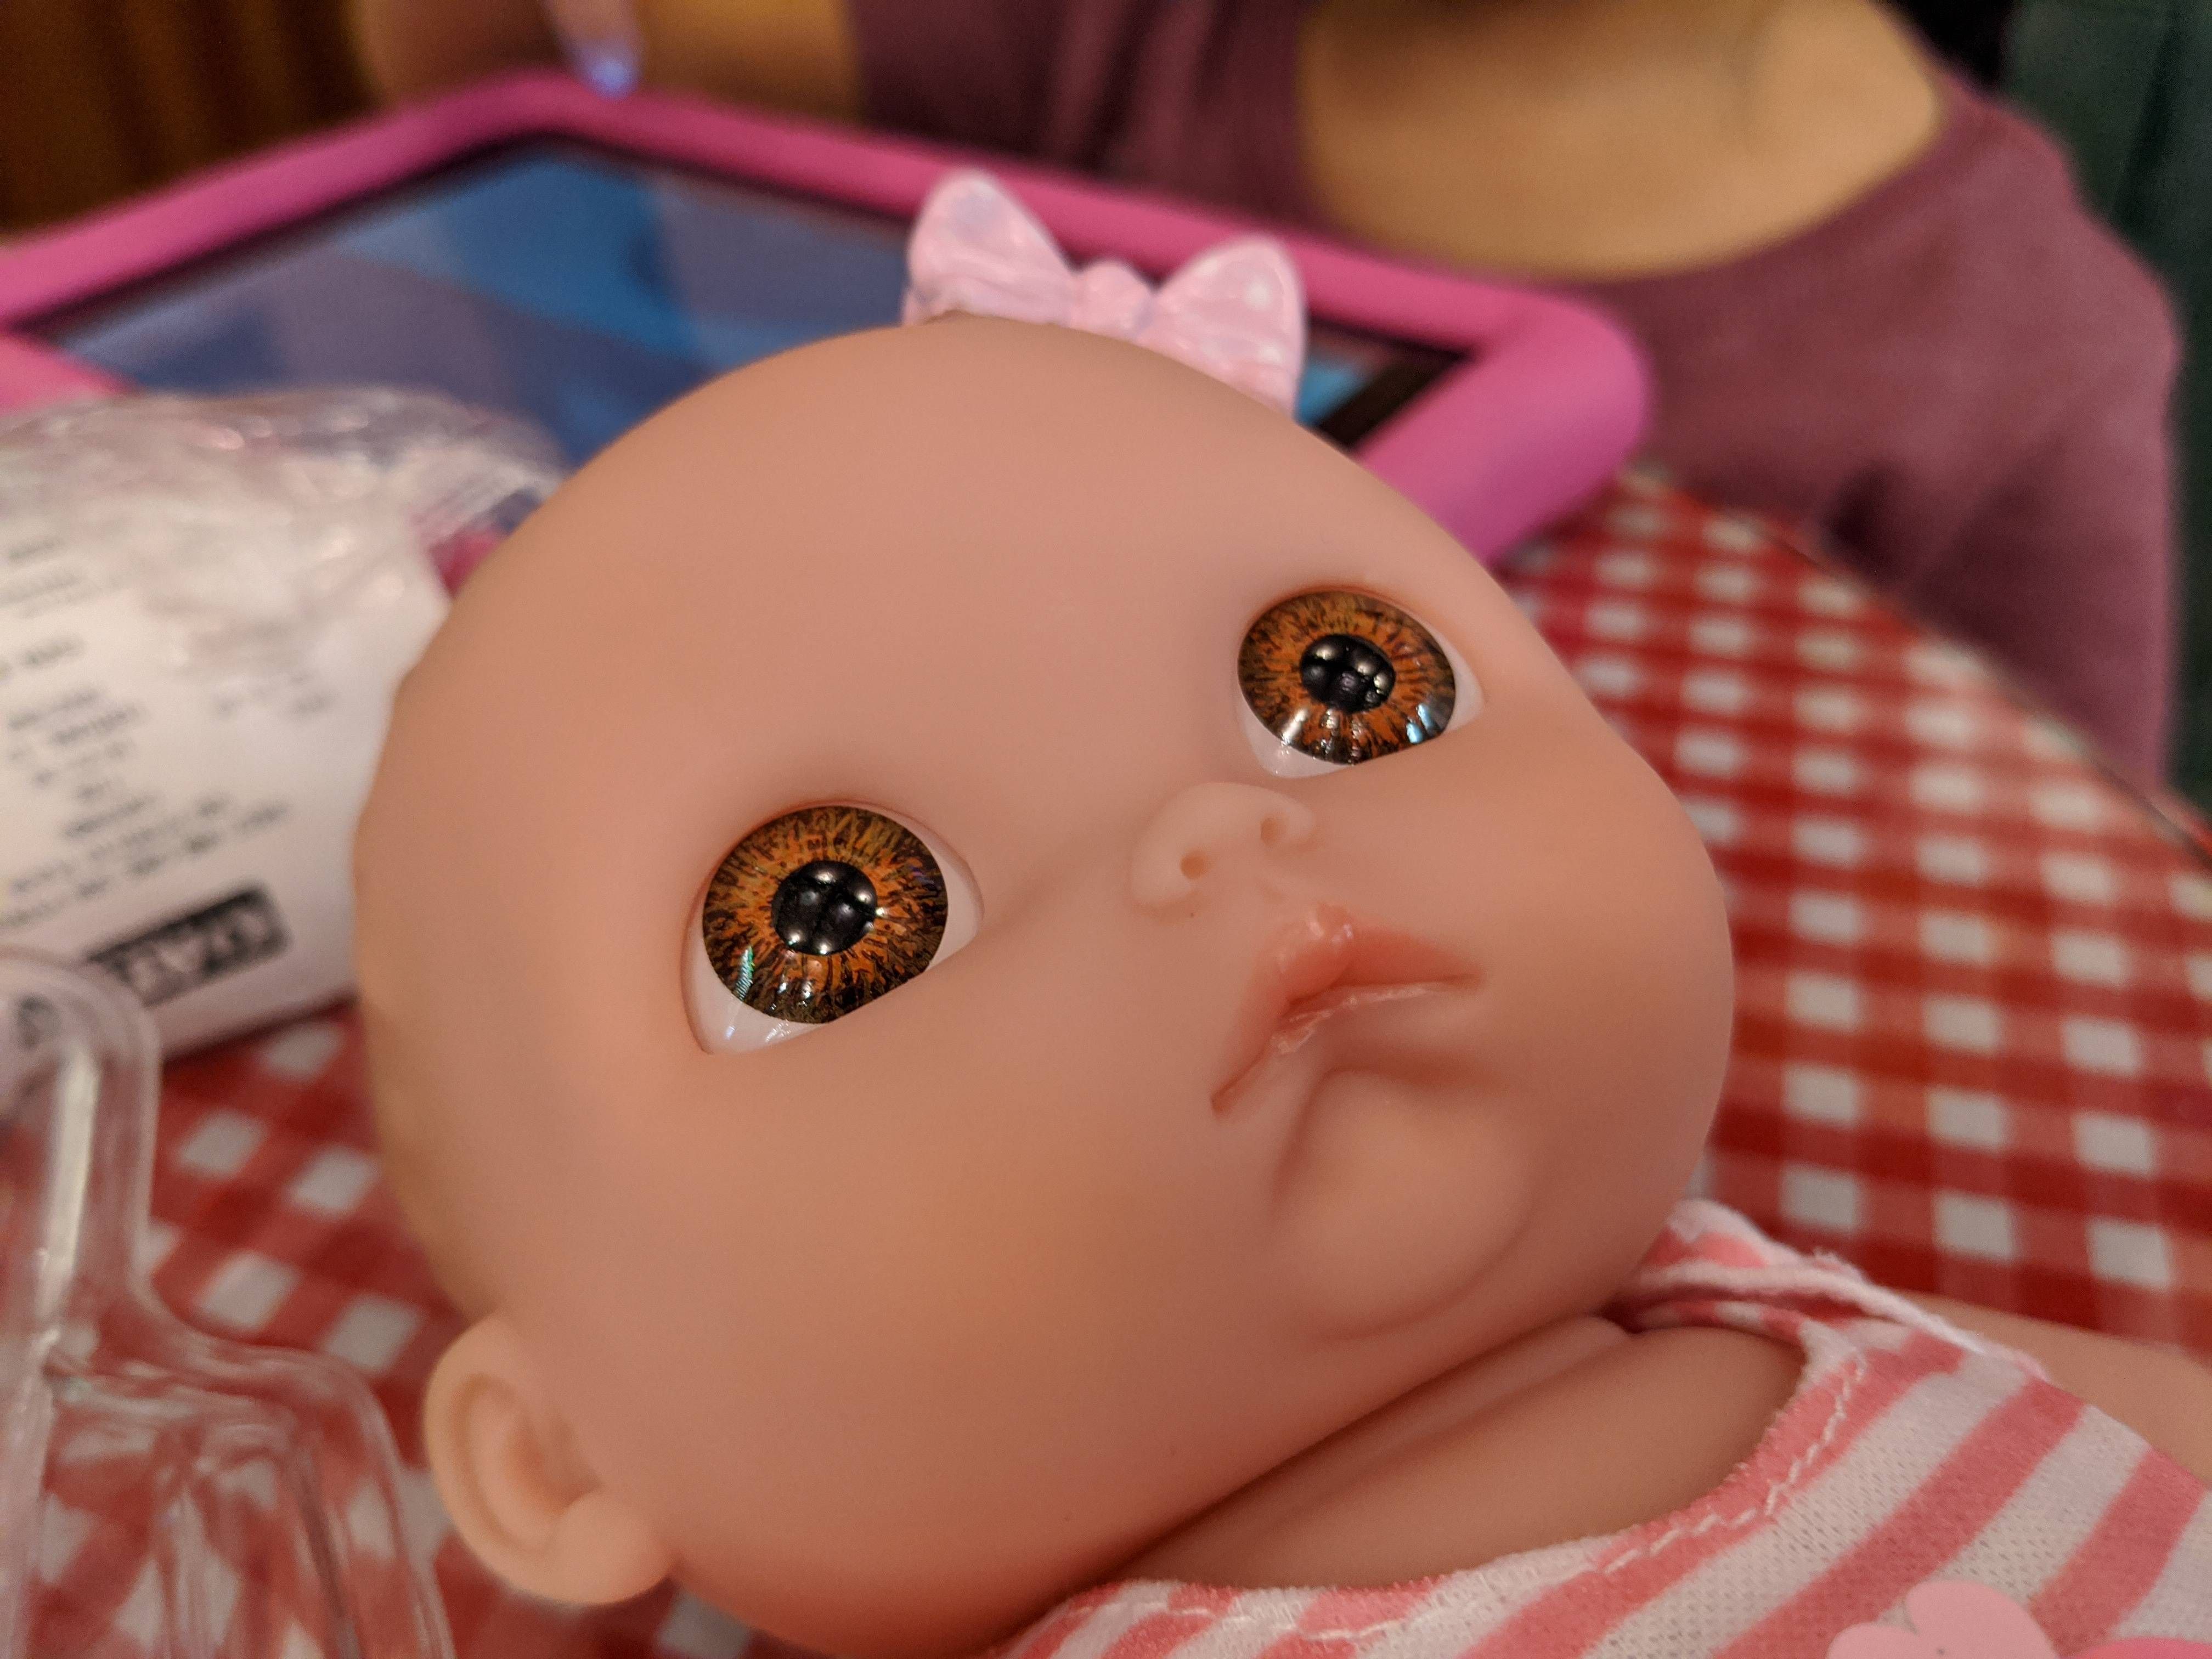 My daughter's doll has seen some shit.